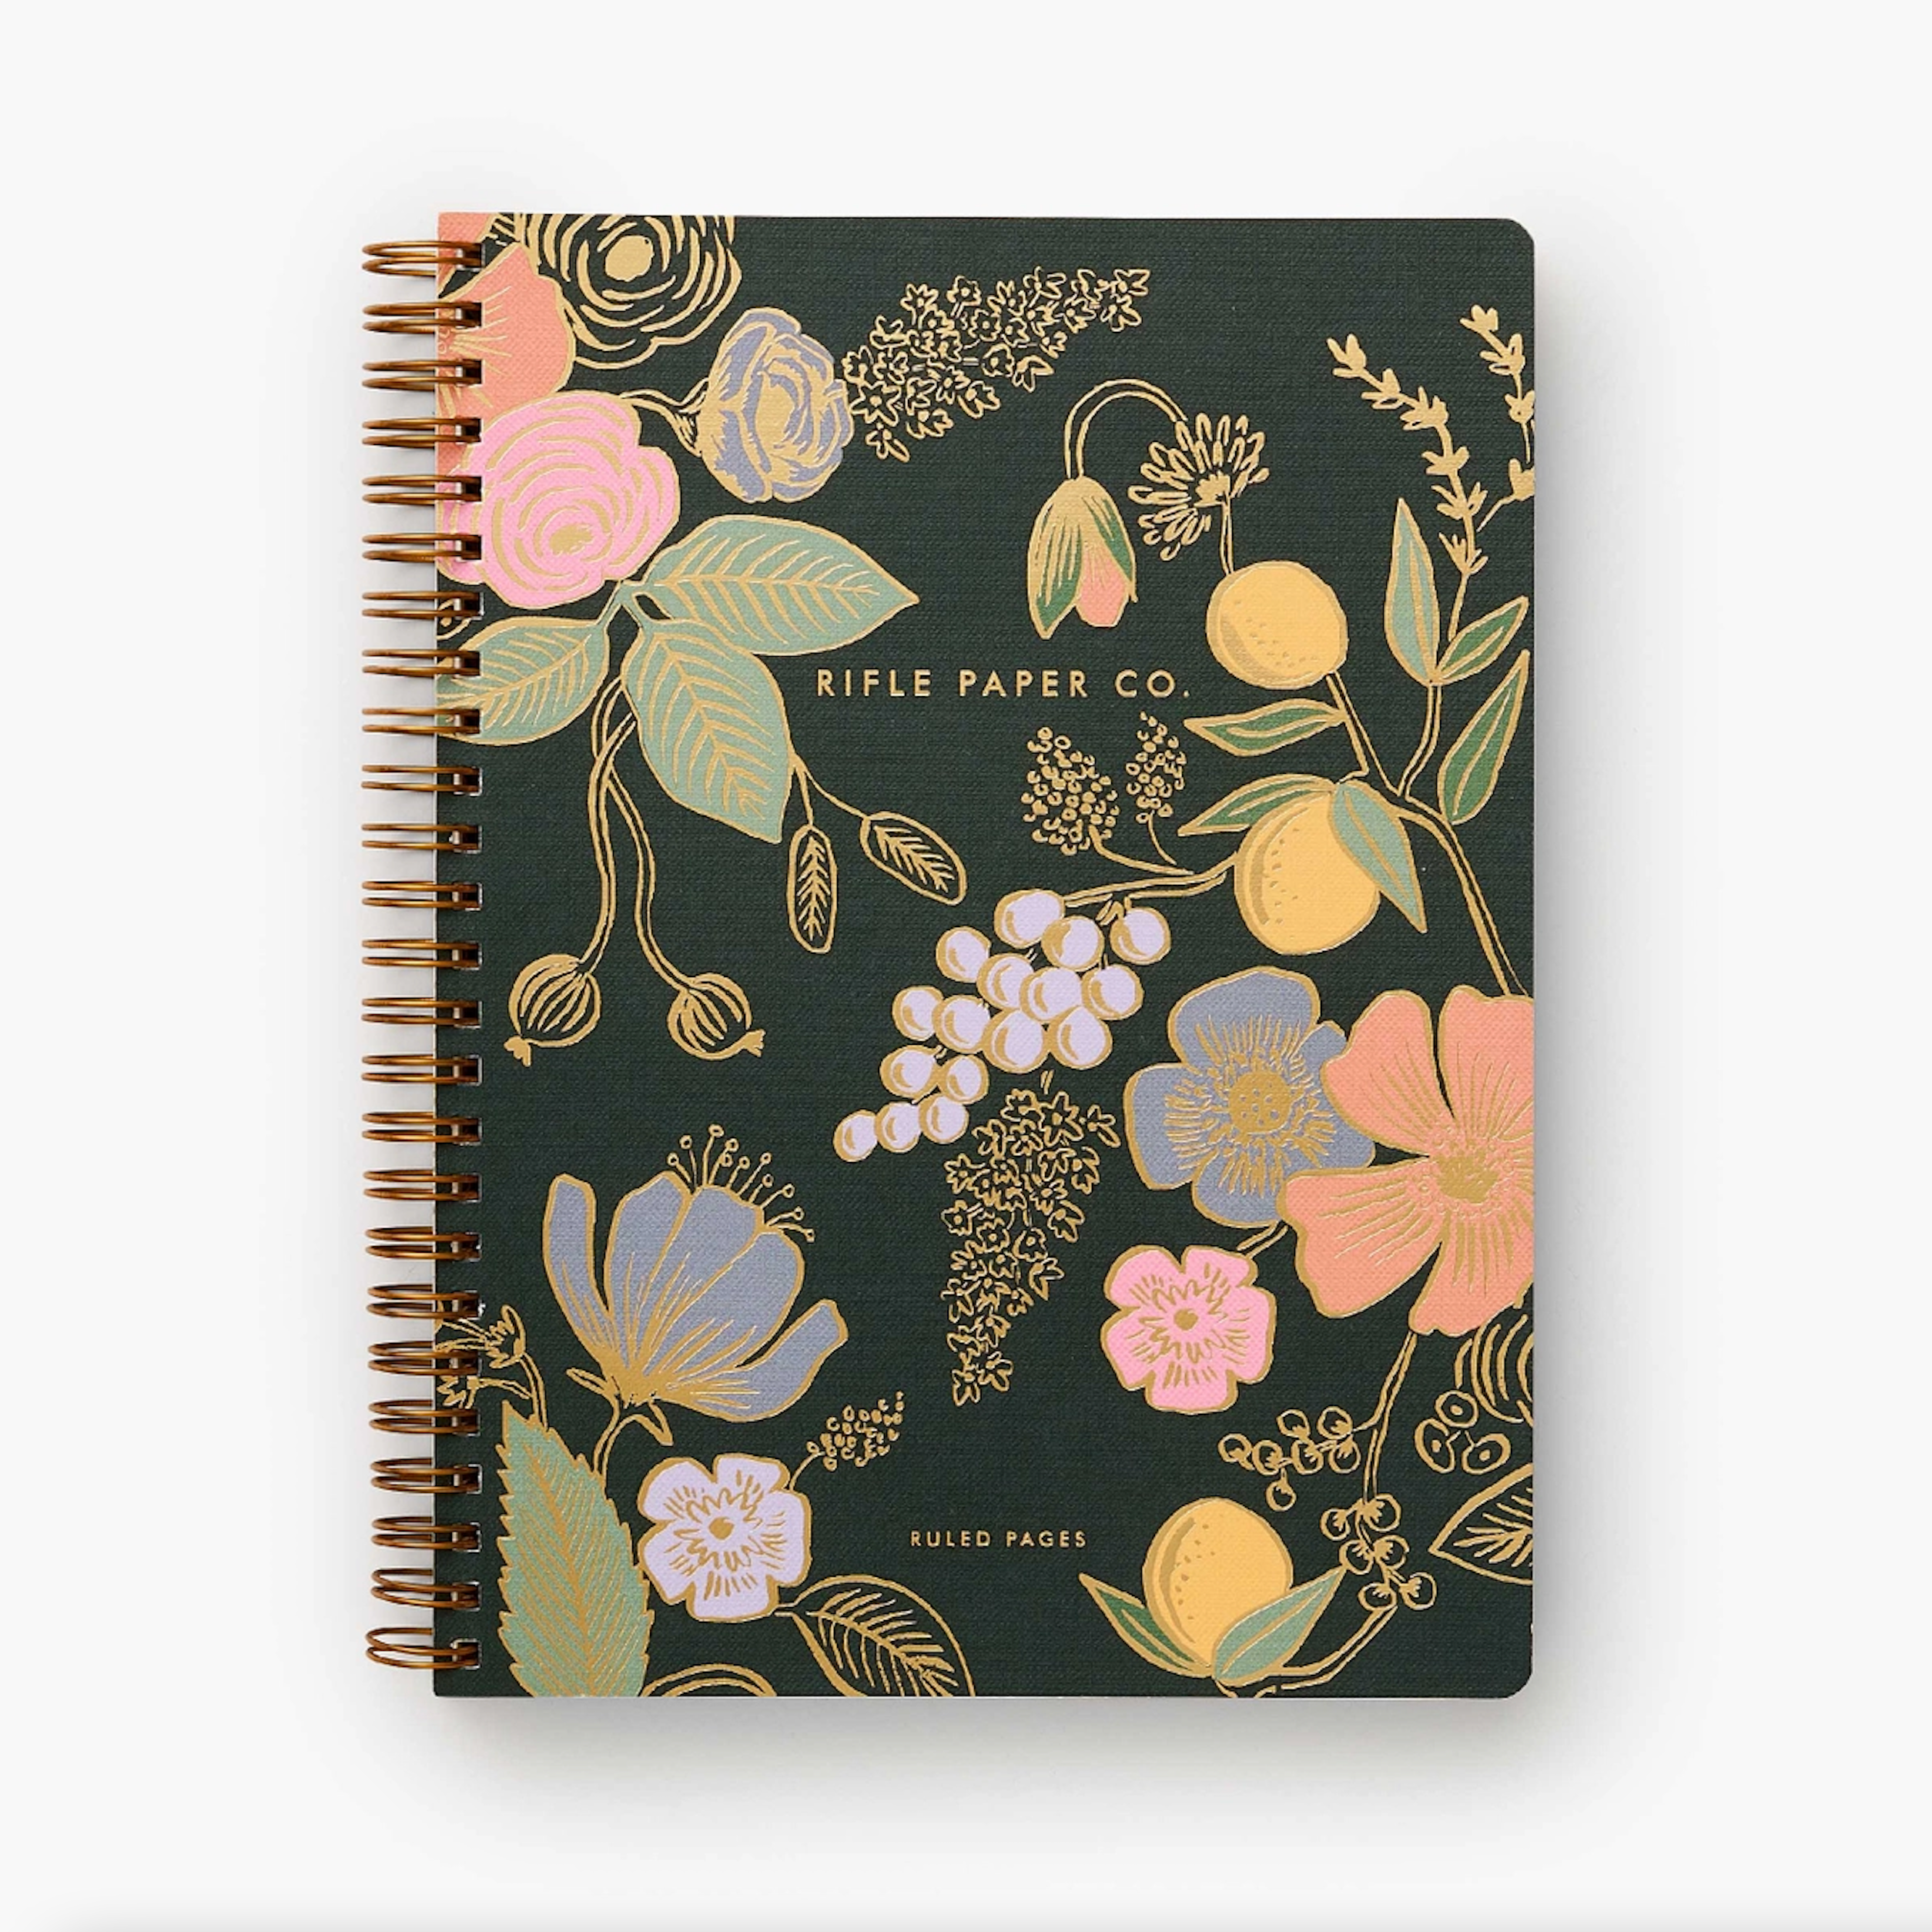 Green spiral notebook with colorful floral elements outlines in gold foil.